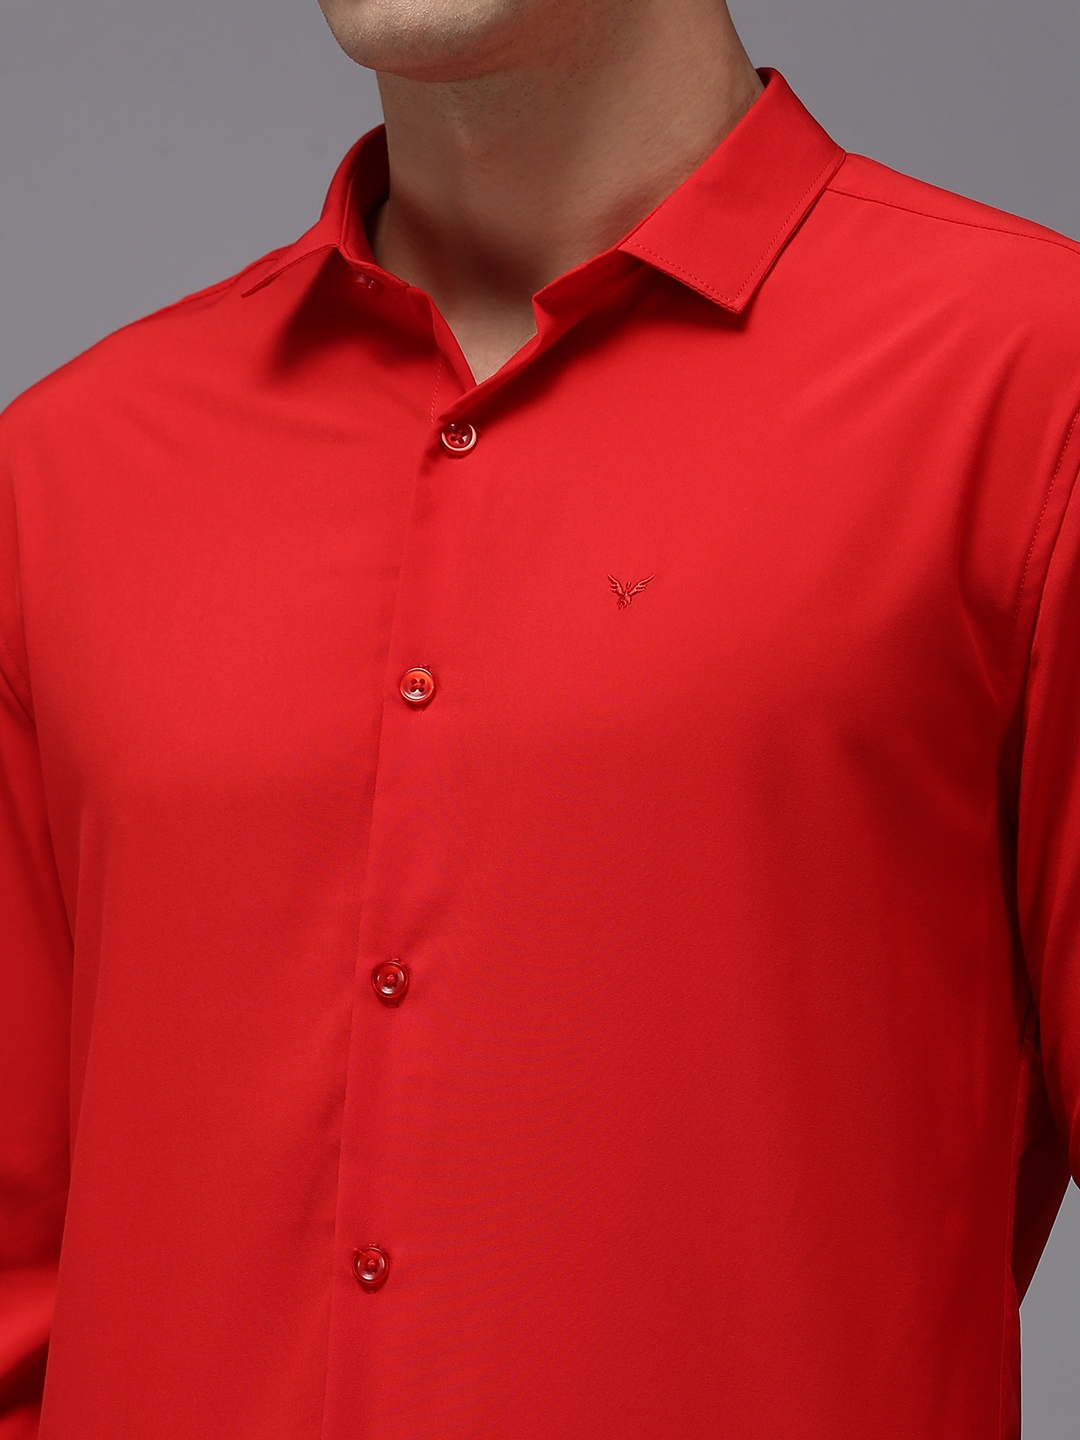 Men's Red Polyester Solid Casual Shirts